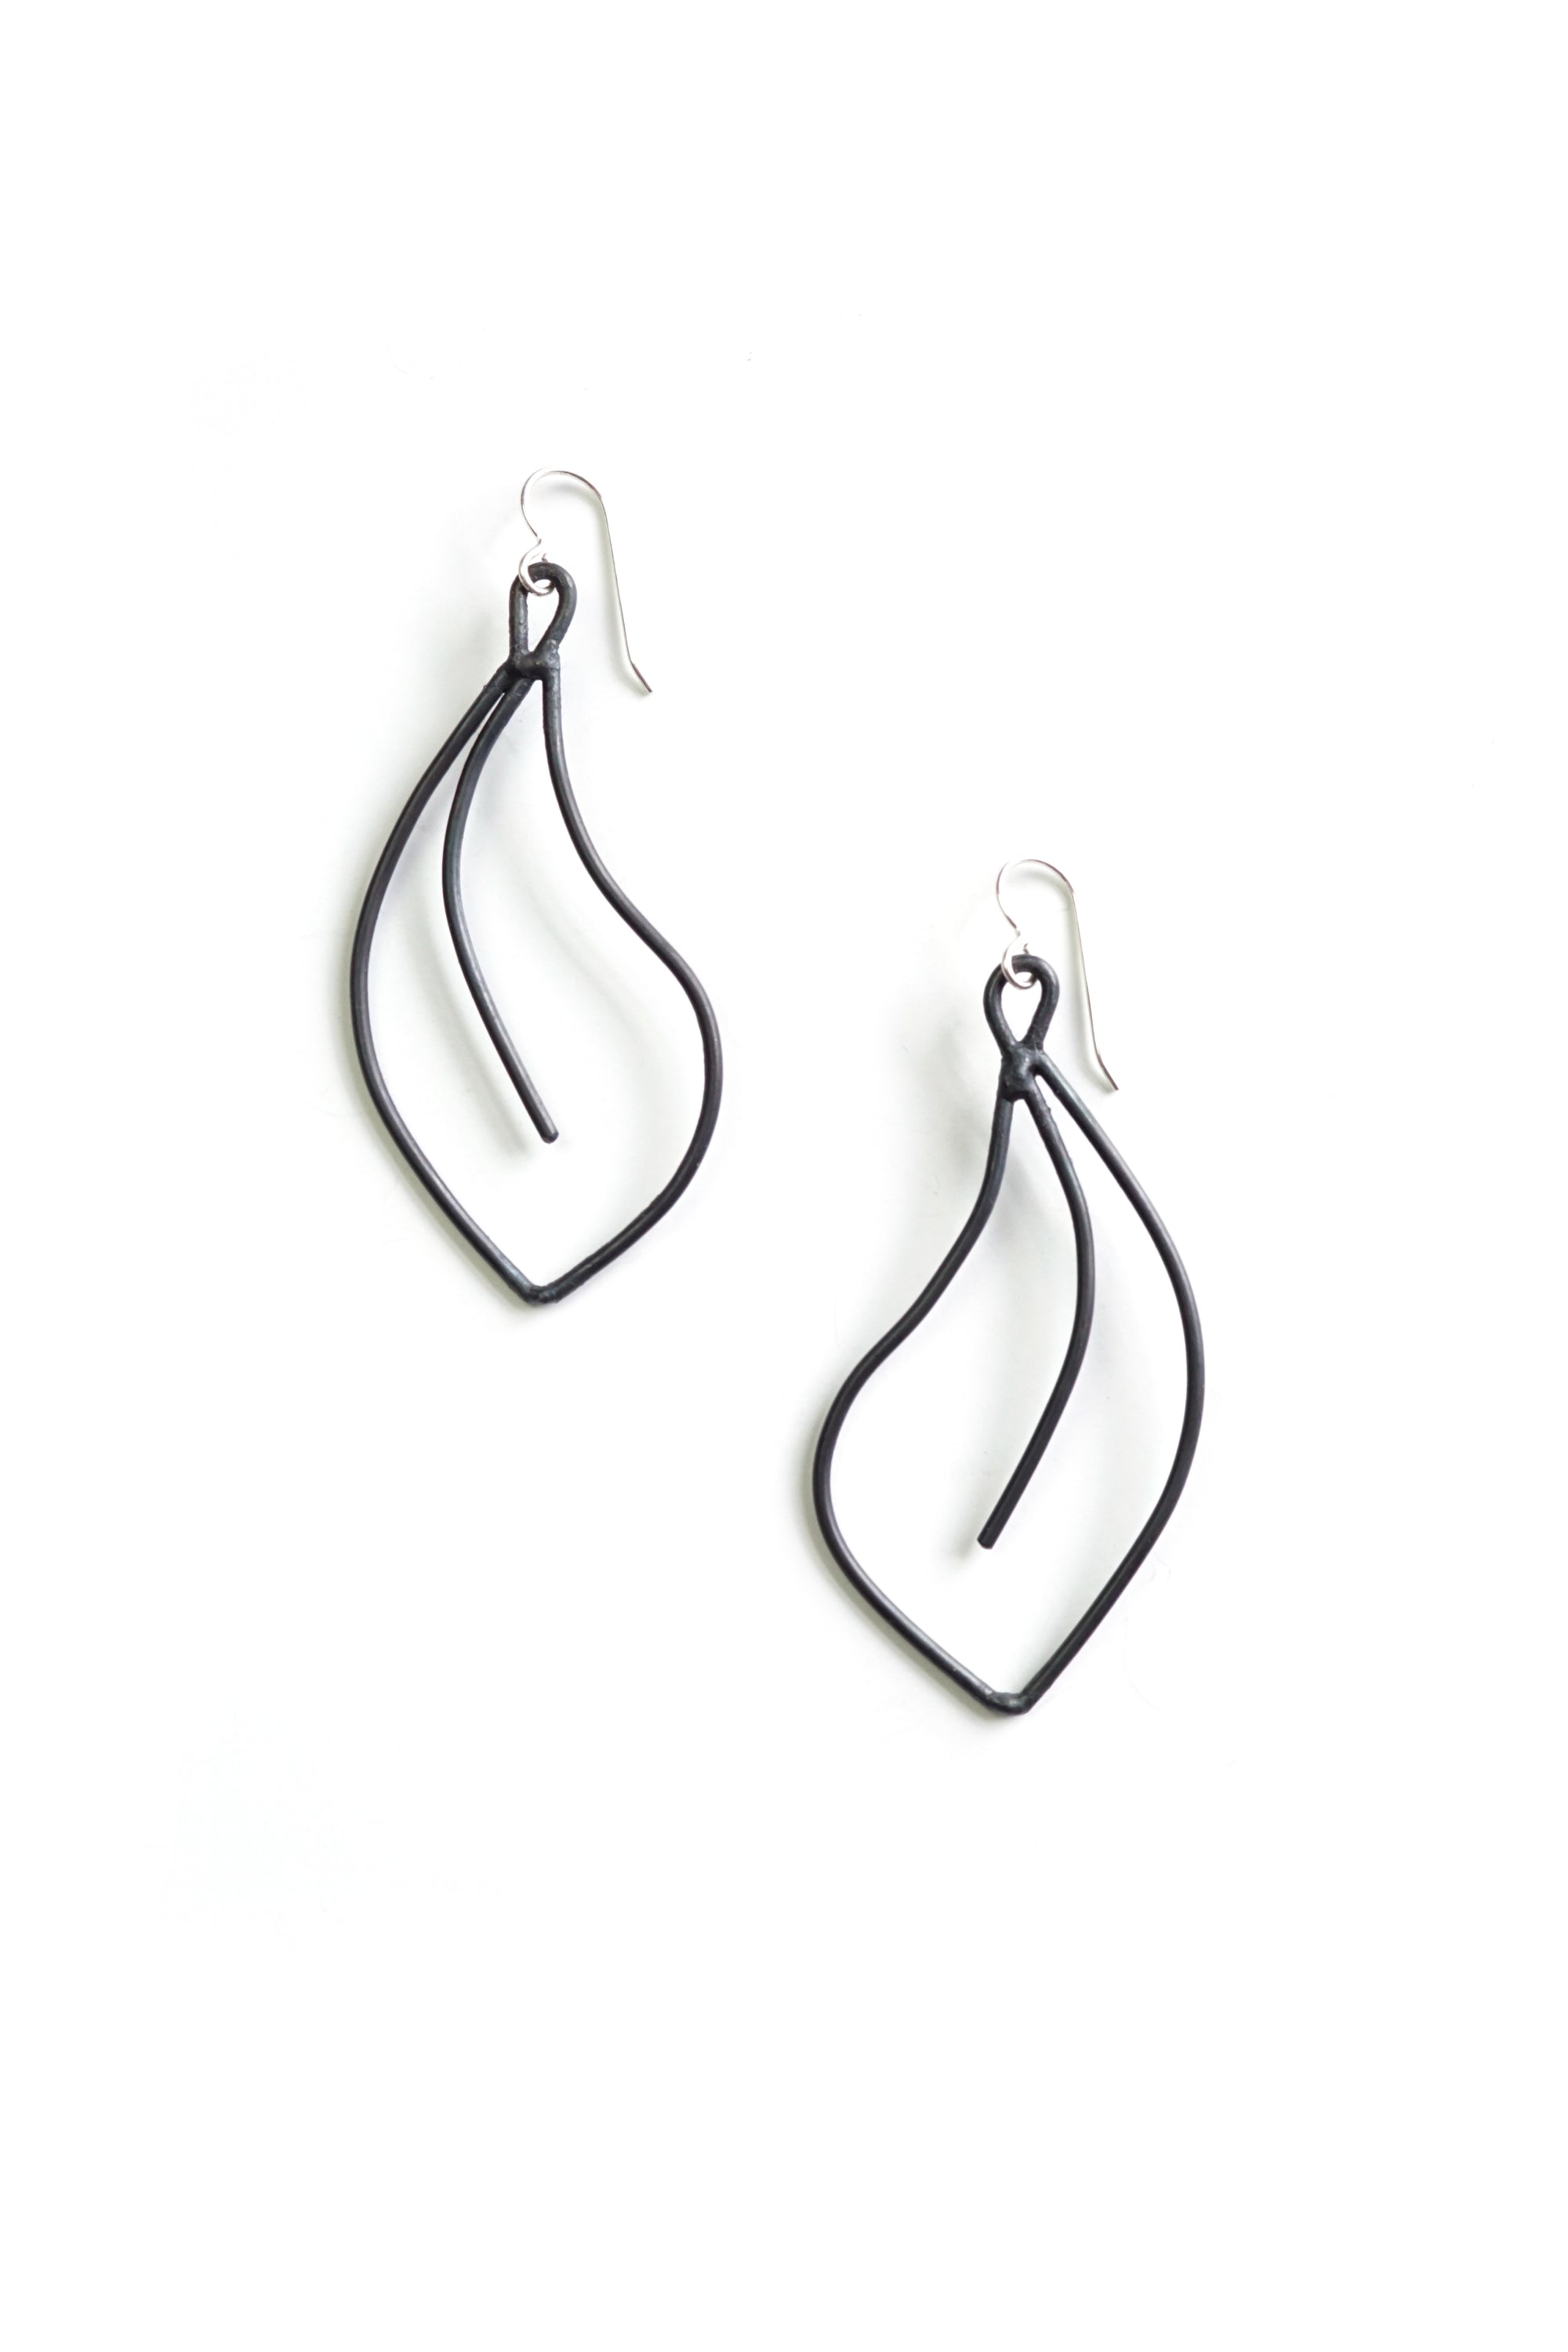 The Flourish earrings add the perfect accent to your every day style and make an excellent addition to your travel wardrobe. Dress them up or down, the possibilities are endless!